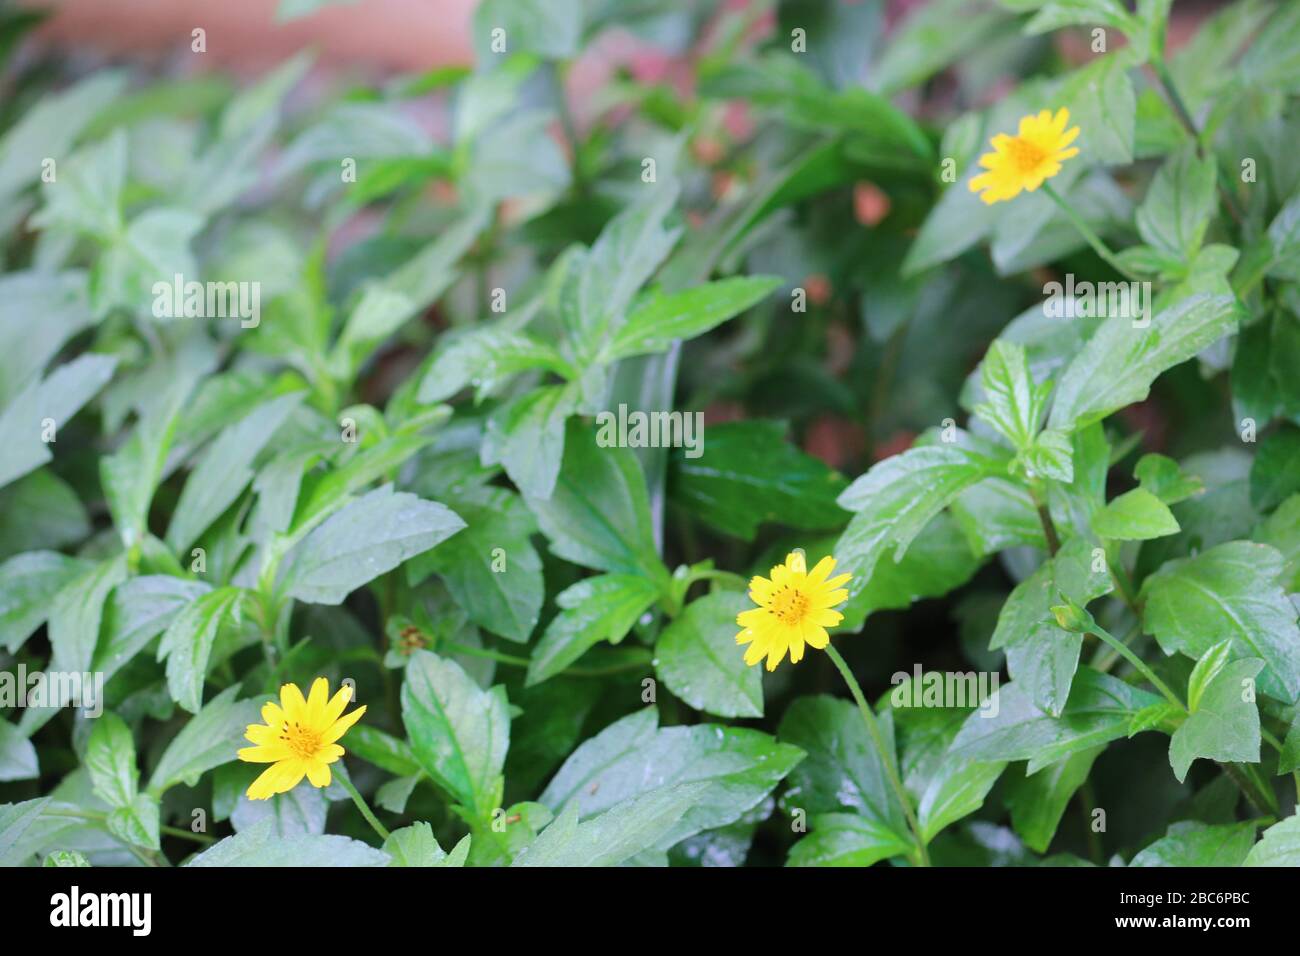 Wedelia flowers with green leaves Stock Photo